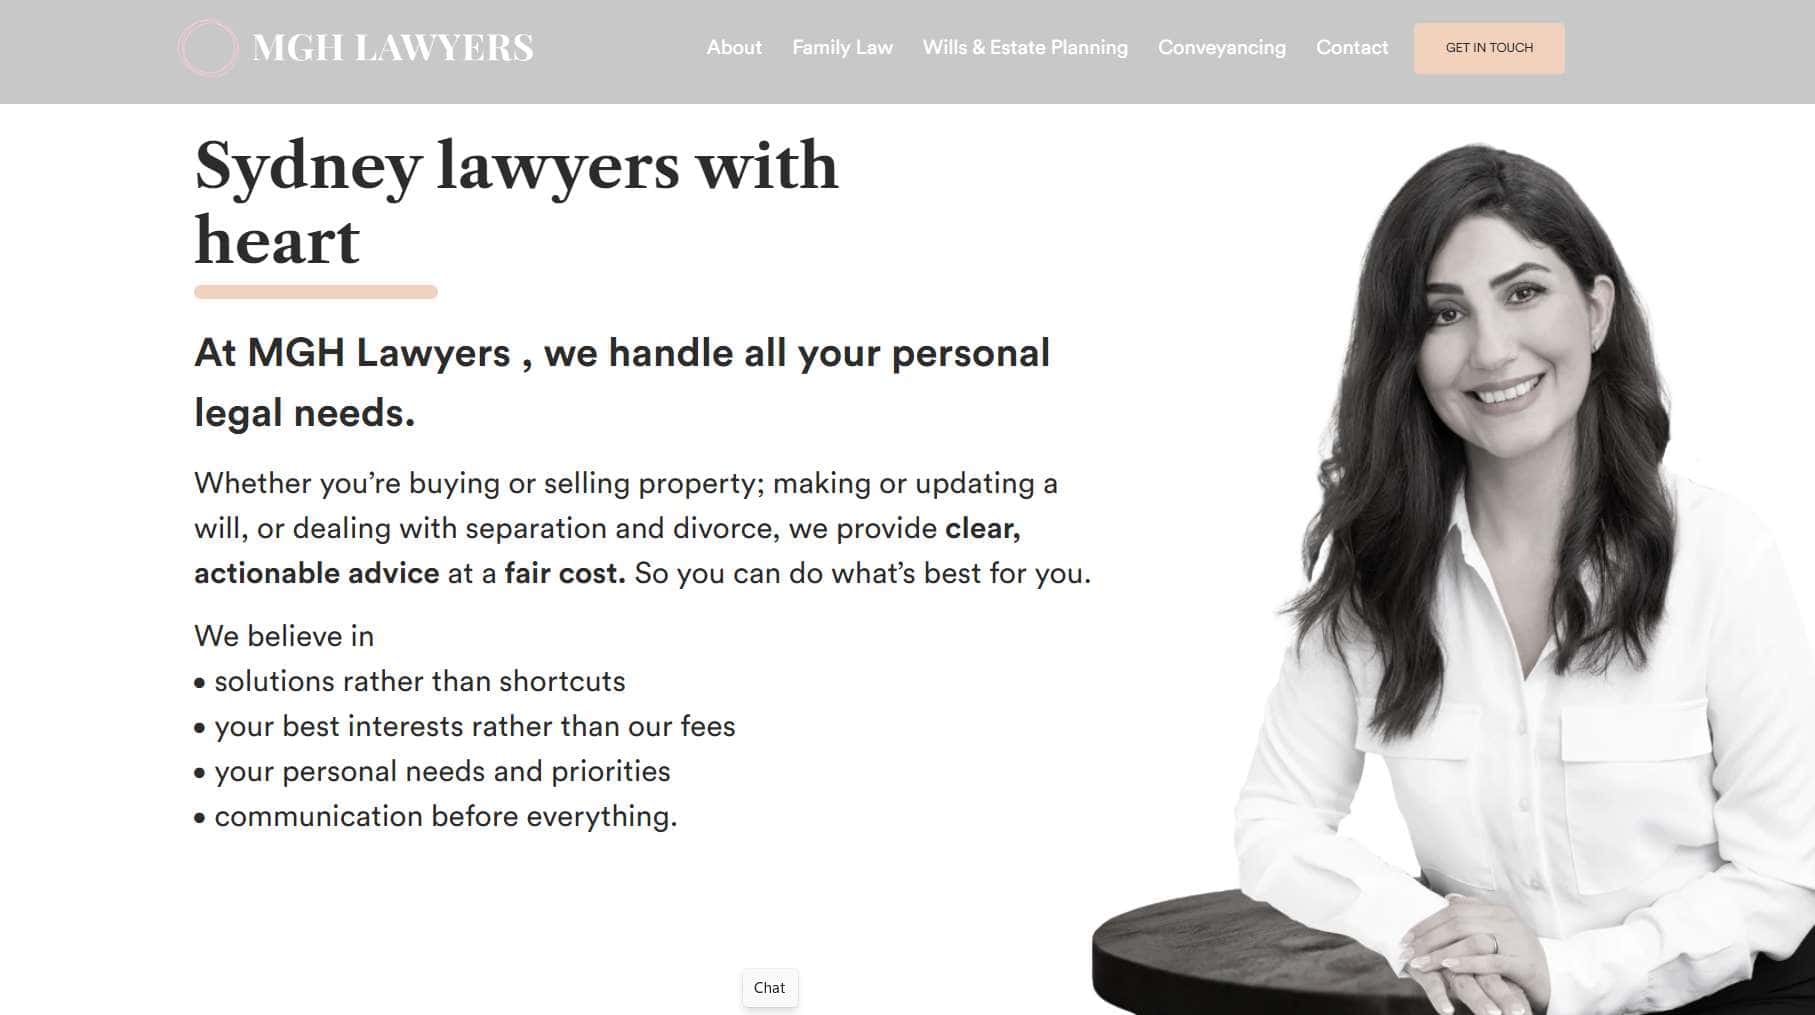 MGH Lawyers home page benefits to the clients